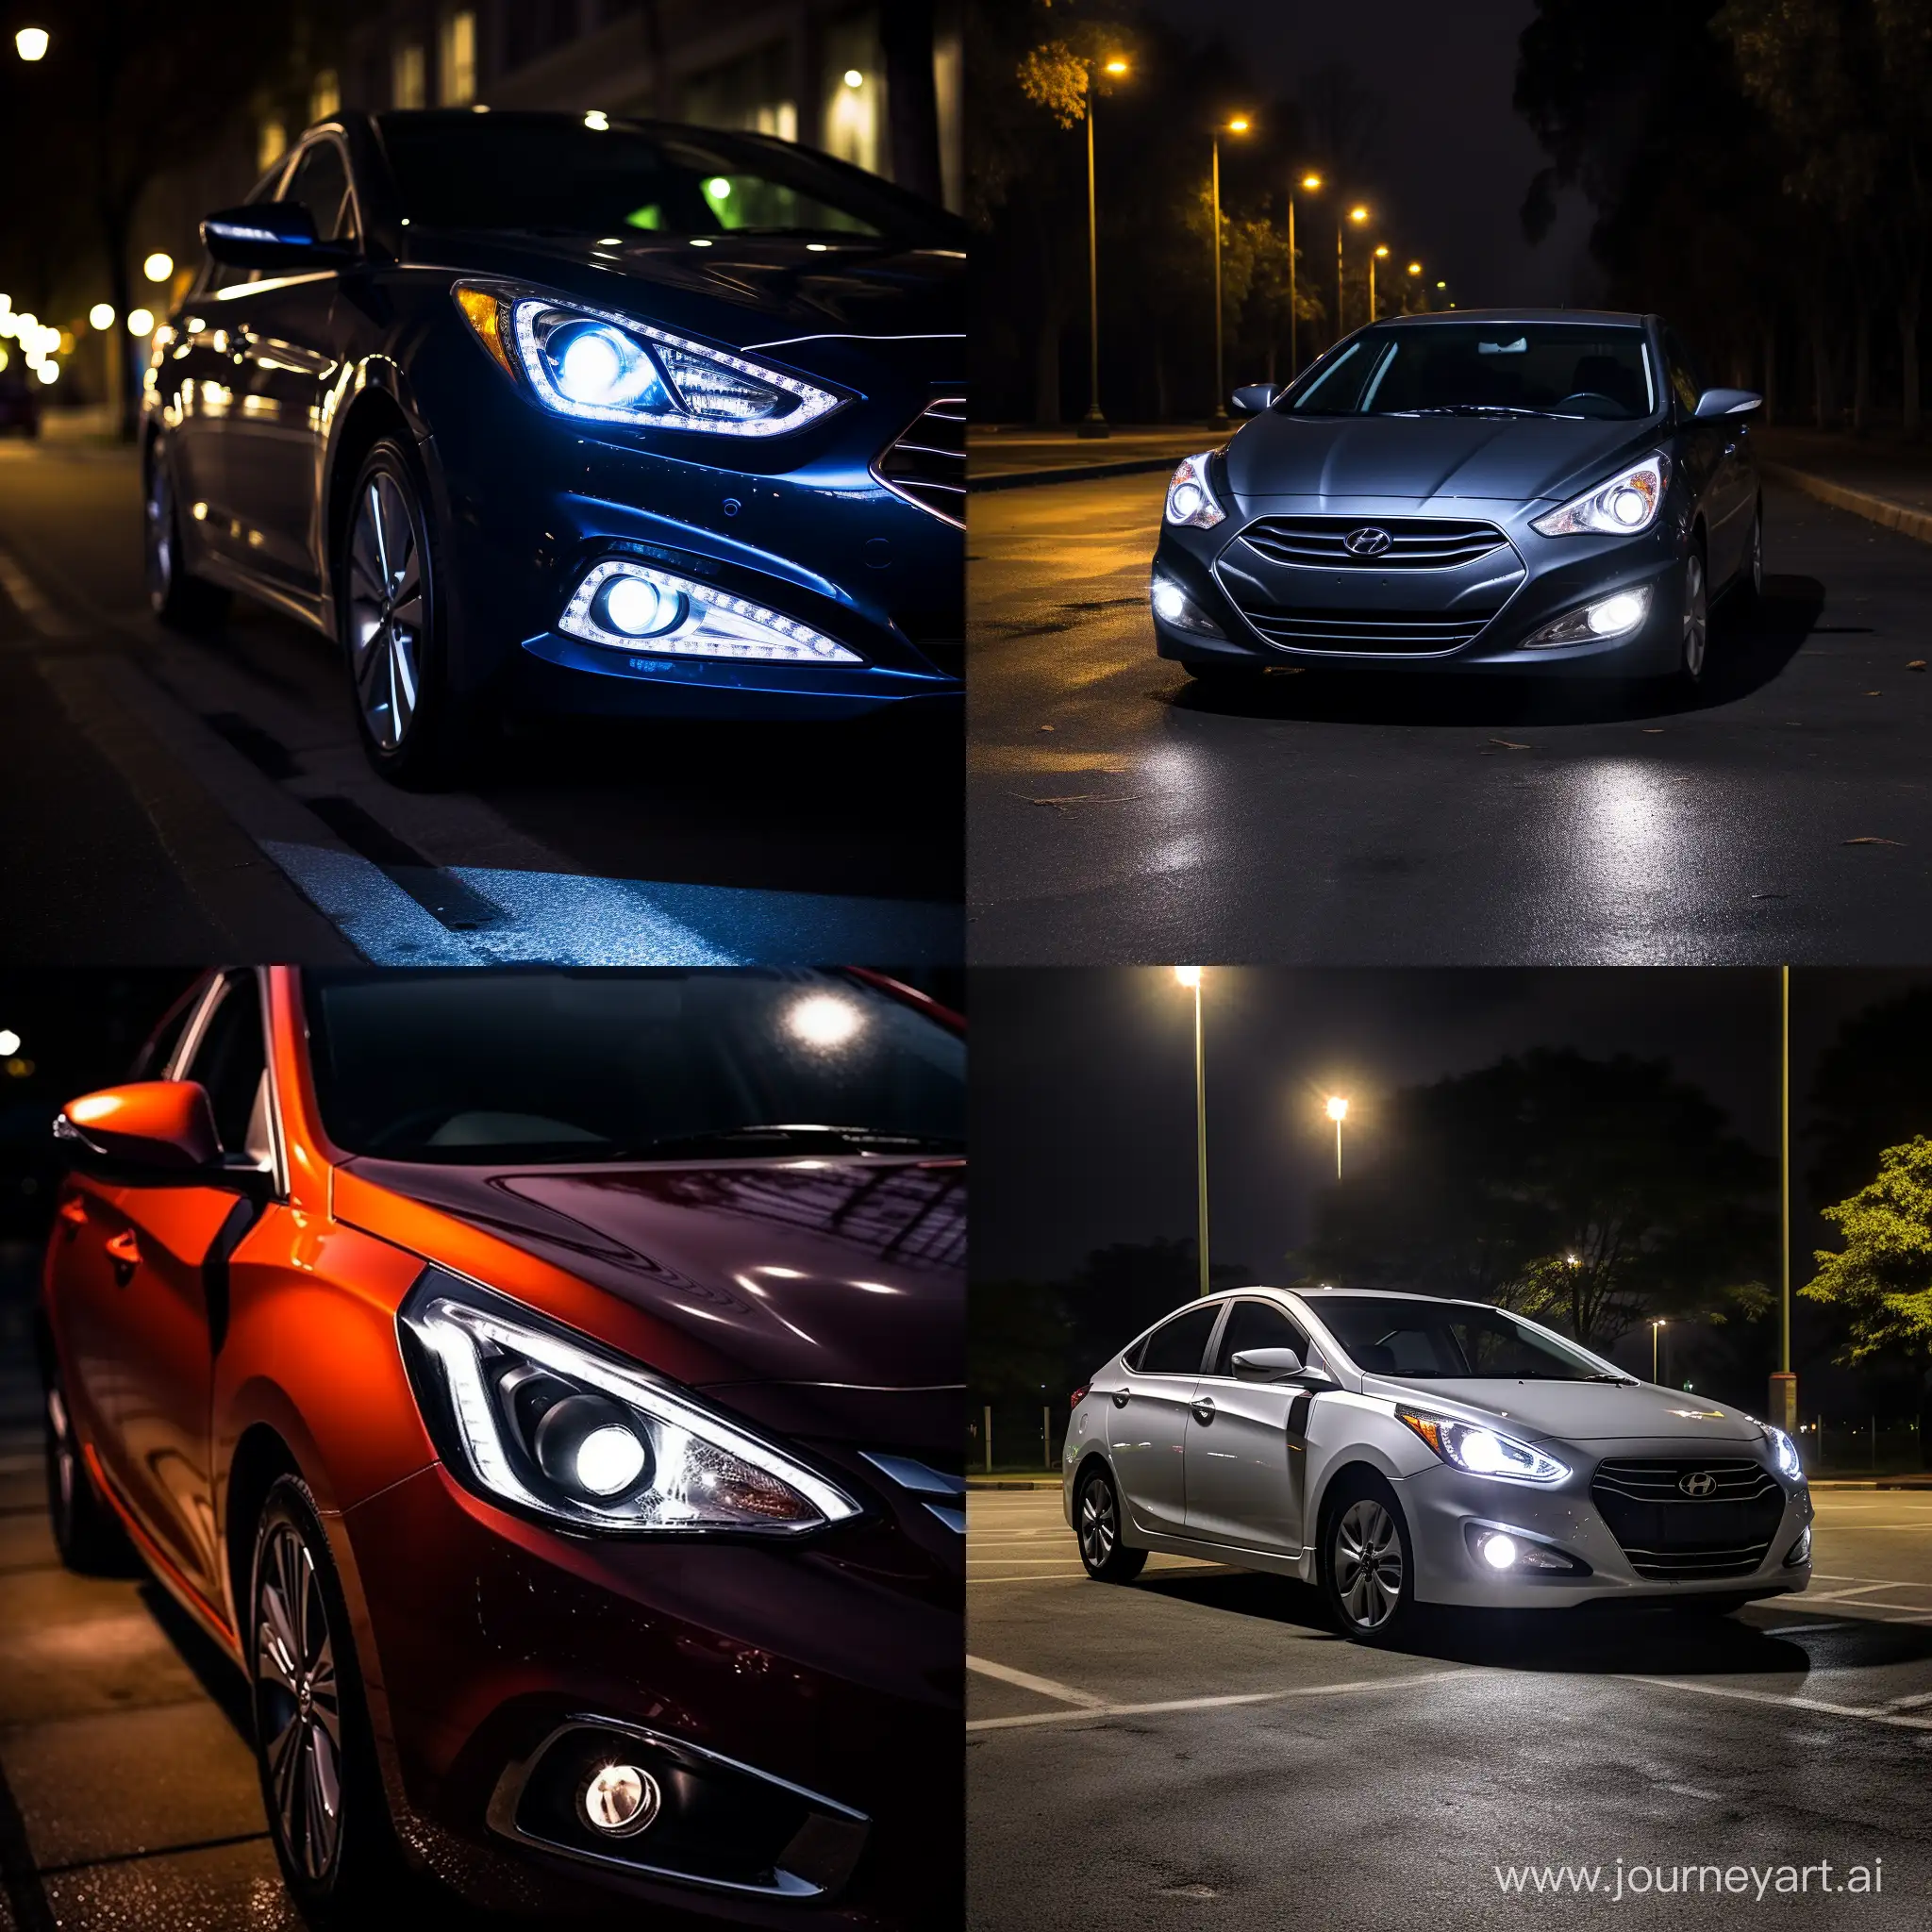 Hyundai-Solaris-2012-Front-View-at-Night-with-Halogen-and-LED-Headlamps